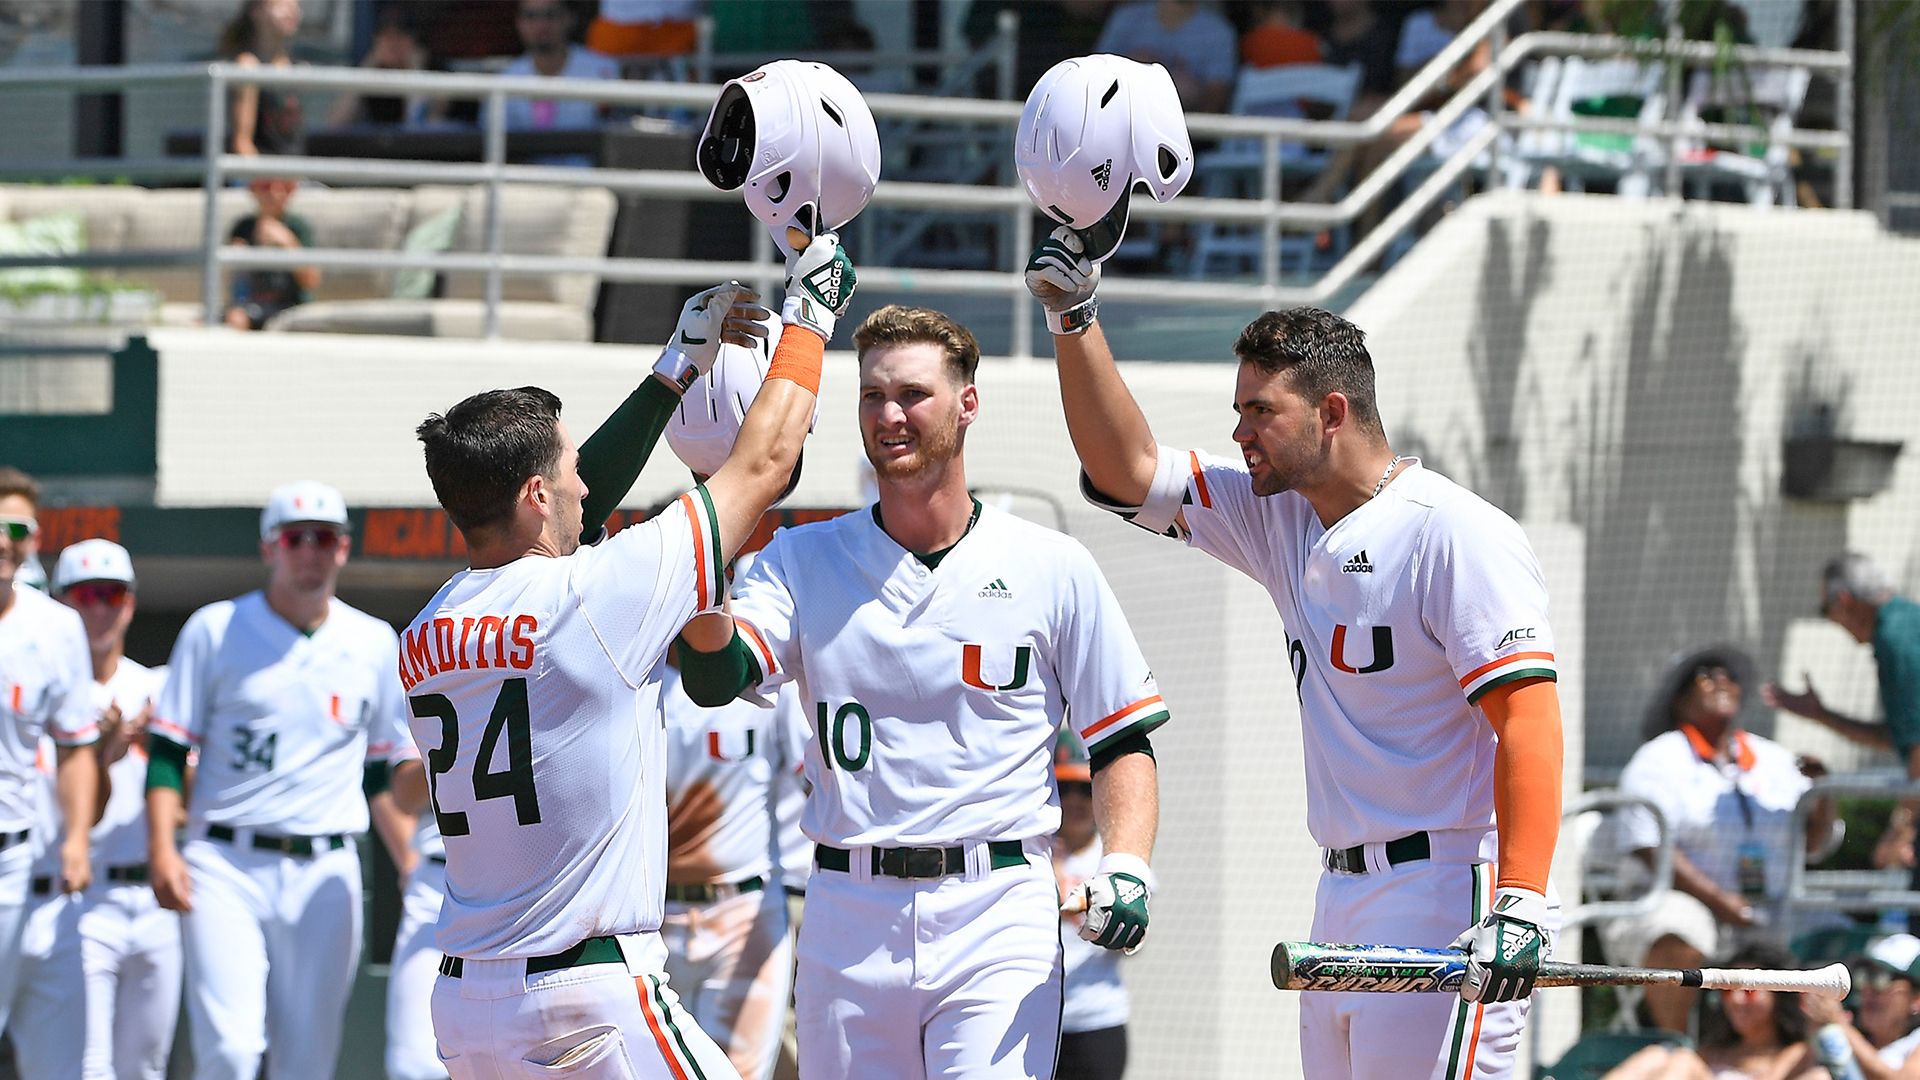 Miami Seeded Fourth in ACC Tournament